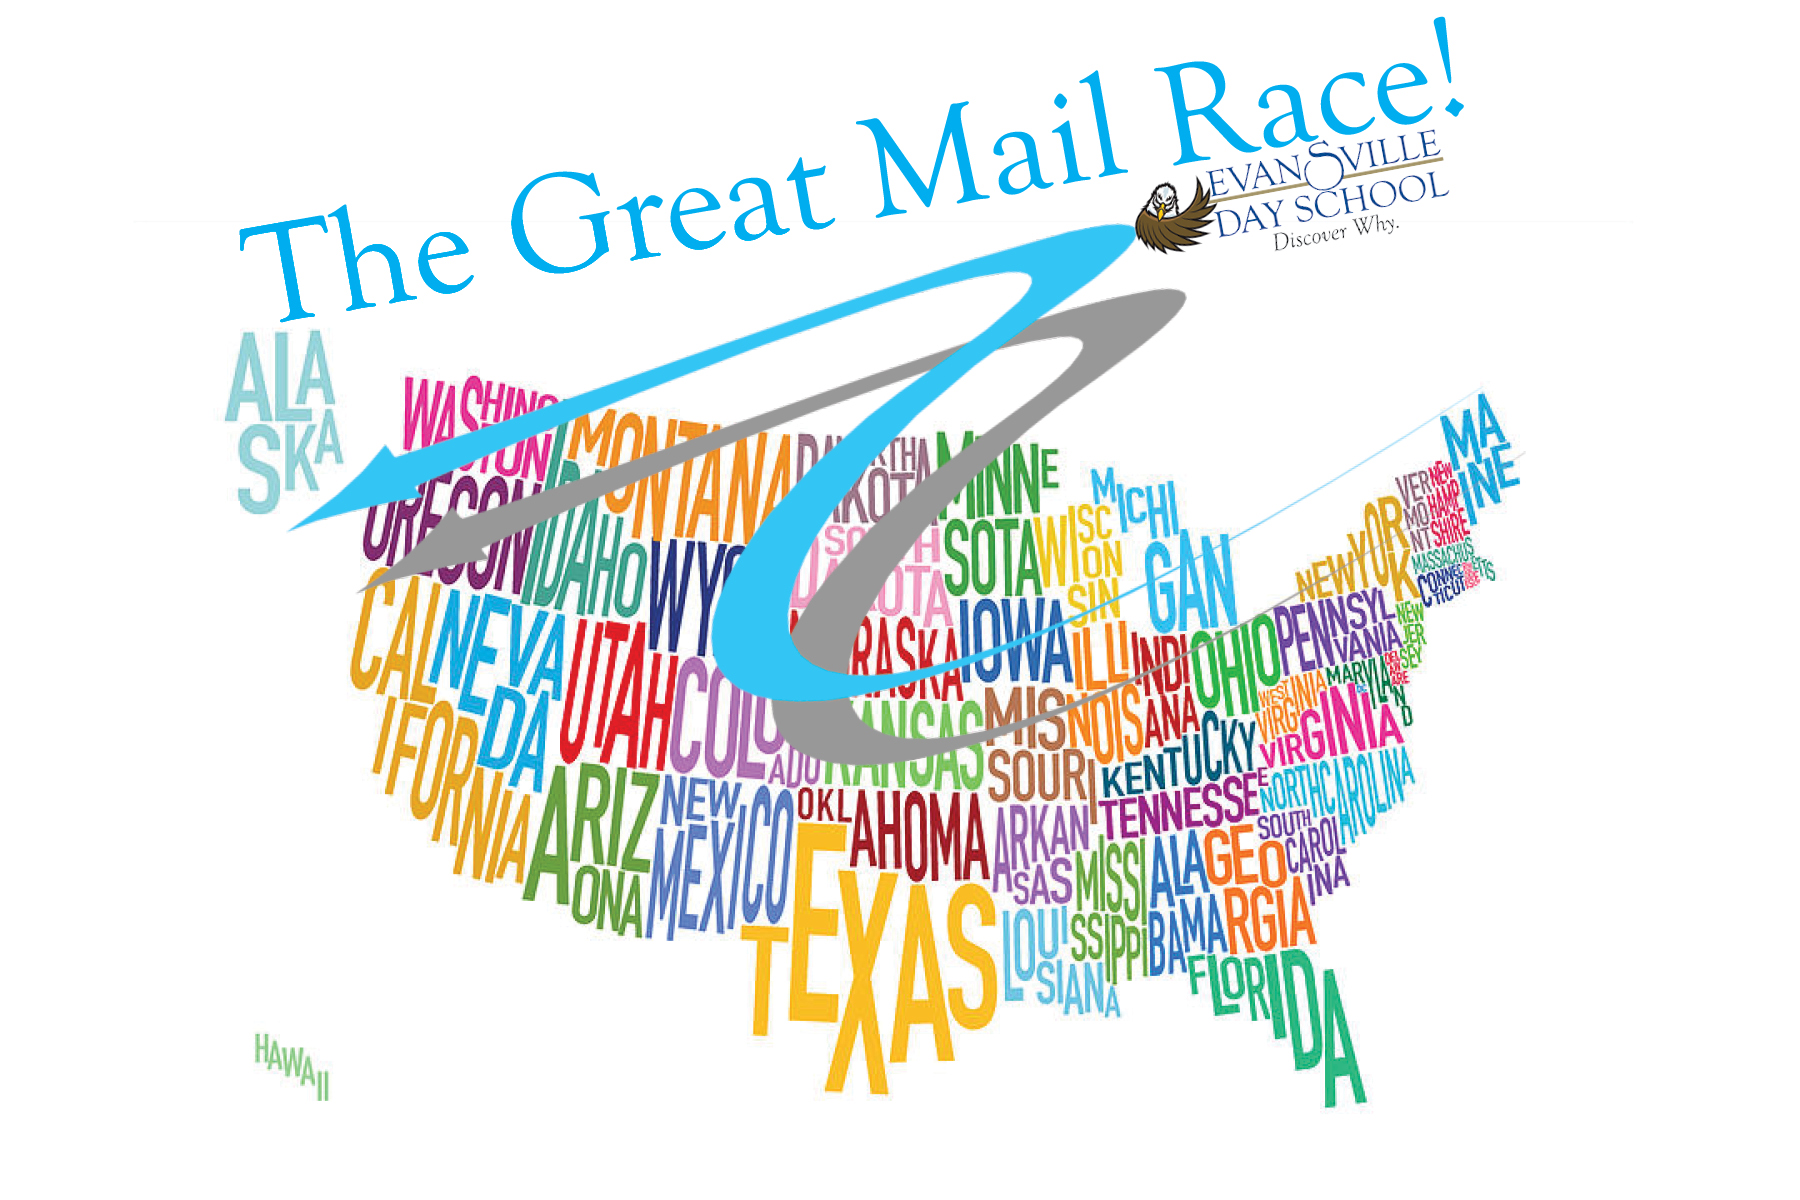 The Great Mail Race